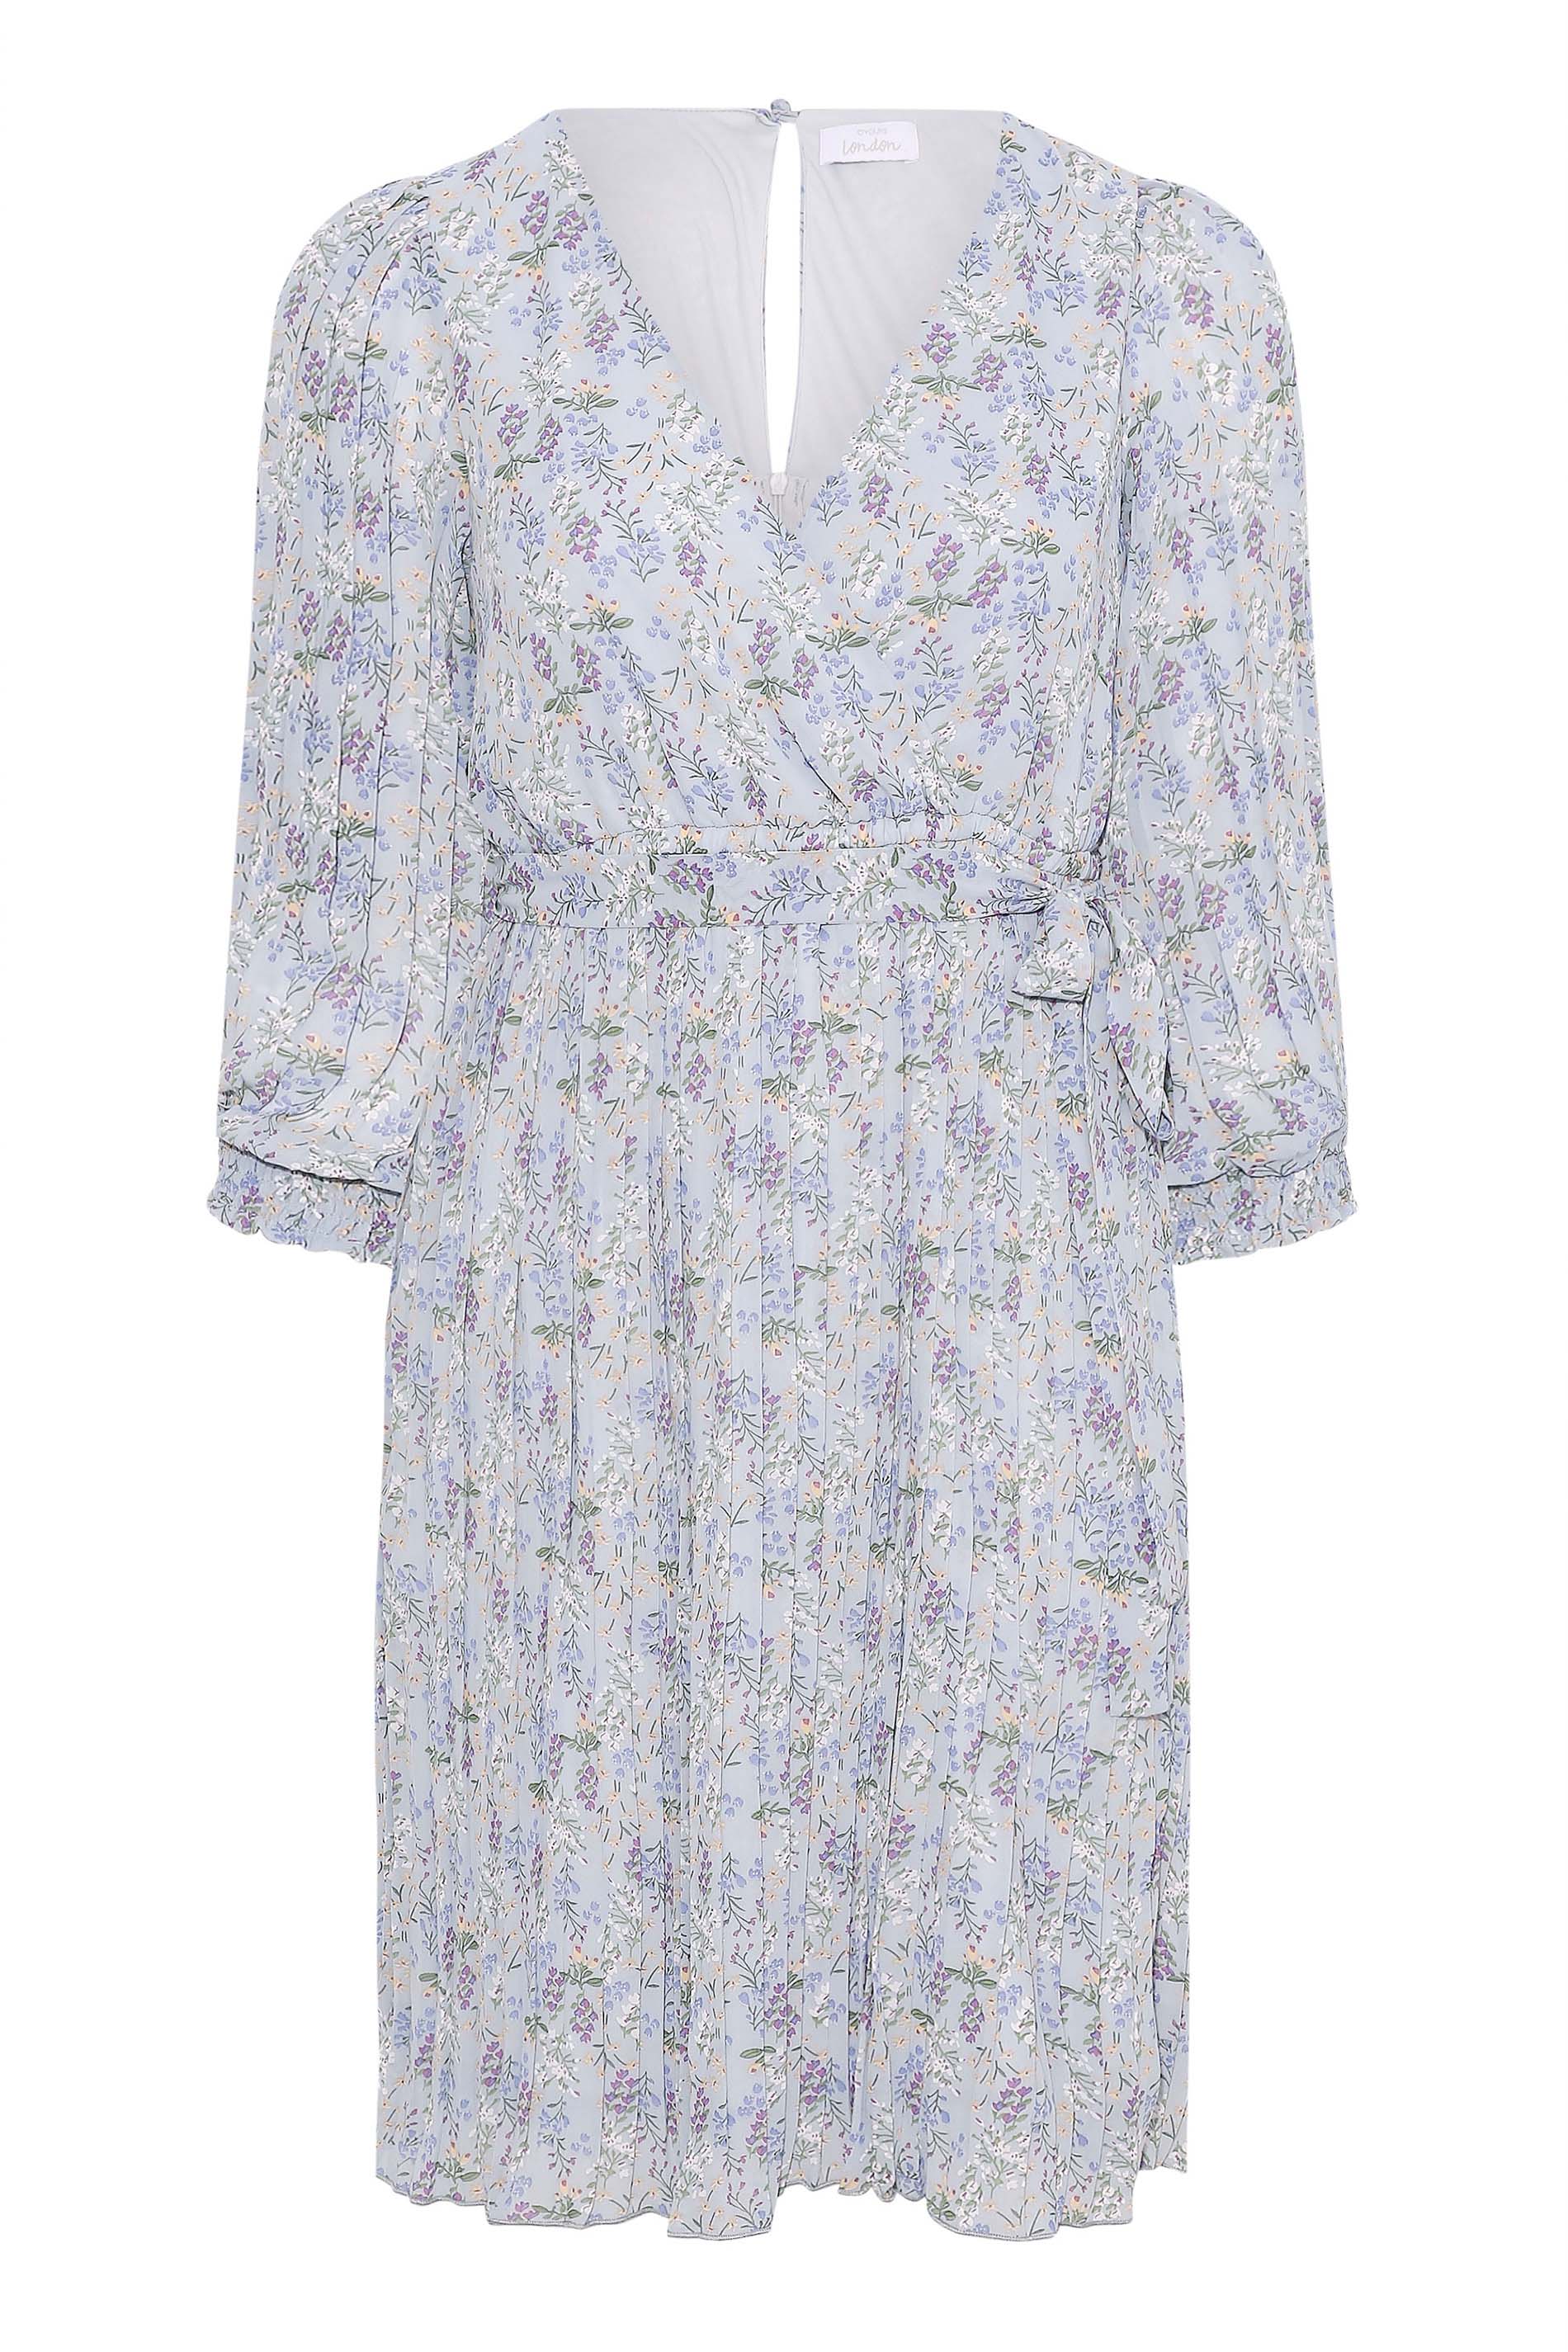 Robes Grande Taille Grande taille  Robes Occasions Spéciales | YOURS LONDON - Robe Bleue Pastel Design Cache-Coeur Floral - RX88882